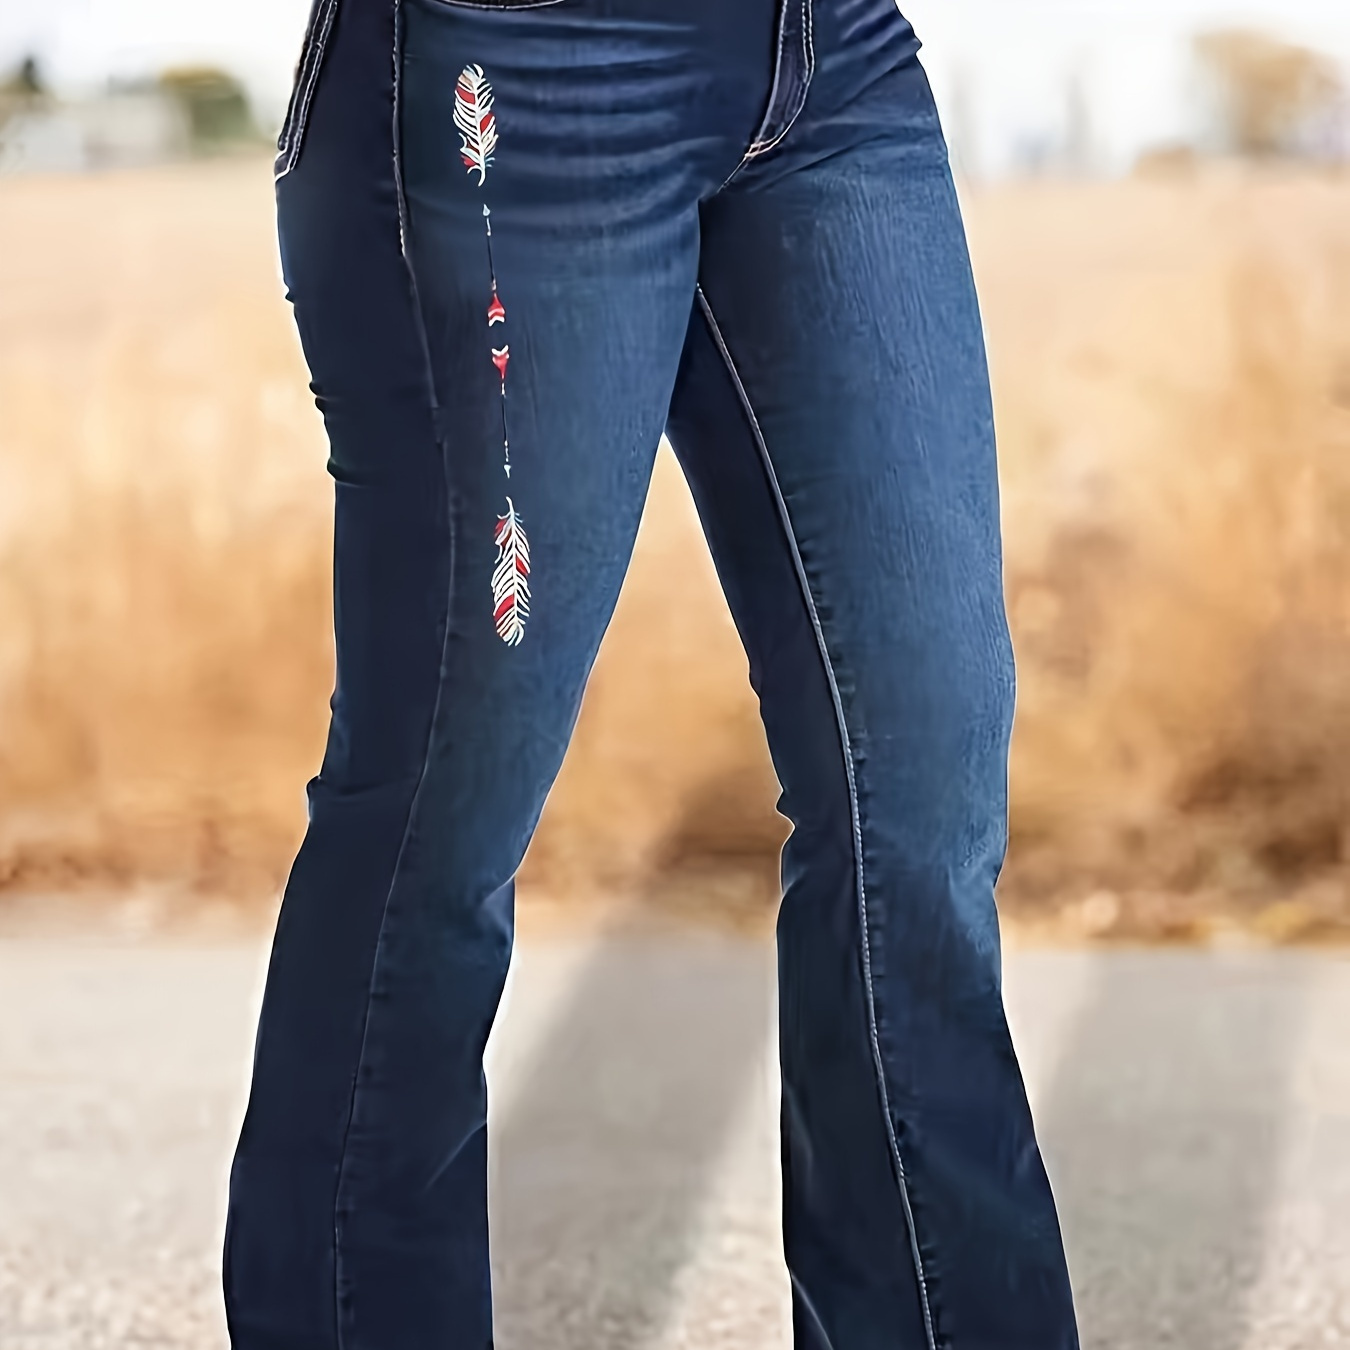 

Feather Embroidery Whiskering Bootcut Jeans, Medium Stretch Retro Cowgirl Style Flare Leg Denim Pants, Women's Denim Jeans & Clothing Suit For Autumn